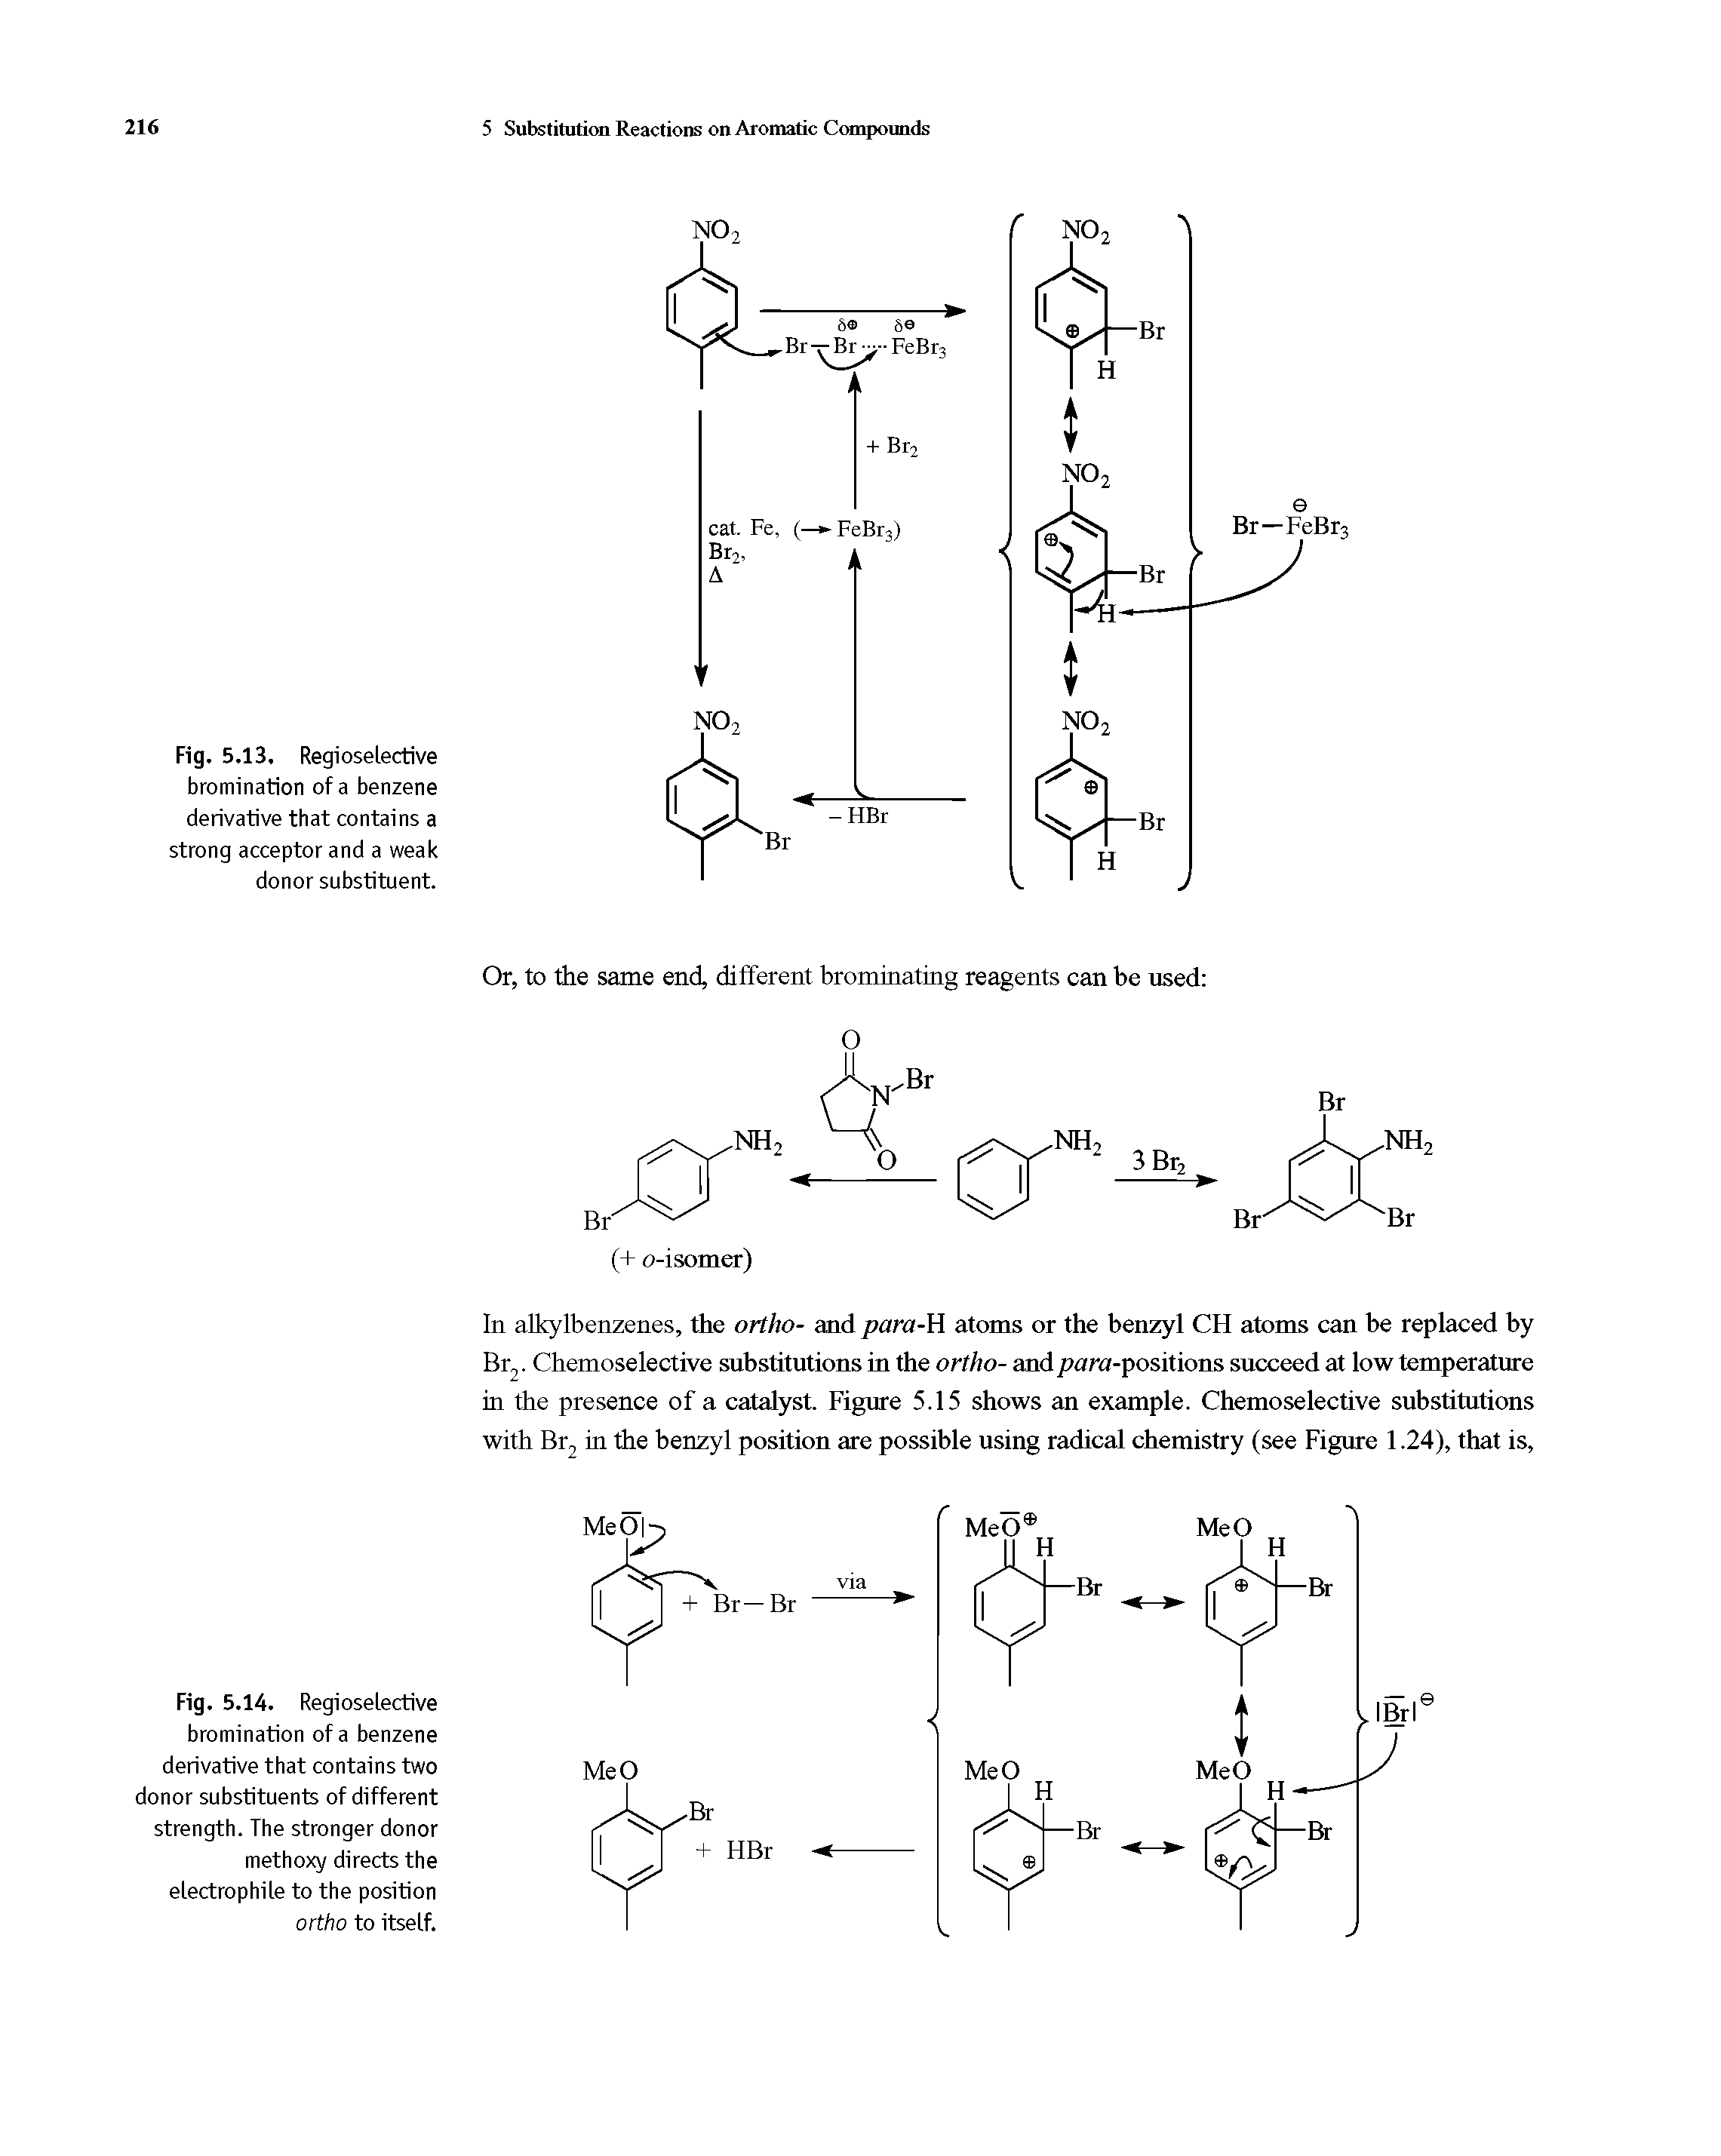 Fig. 5.13, Regioselective bromination of a benzene derivative that contains a strong acceptor and a weak donor substituent.